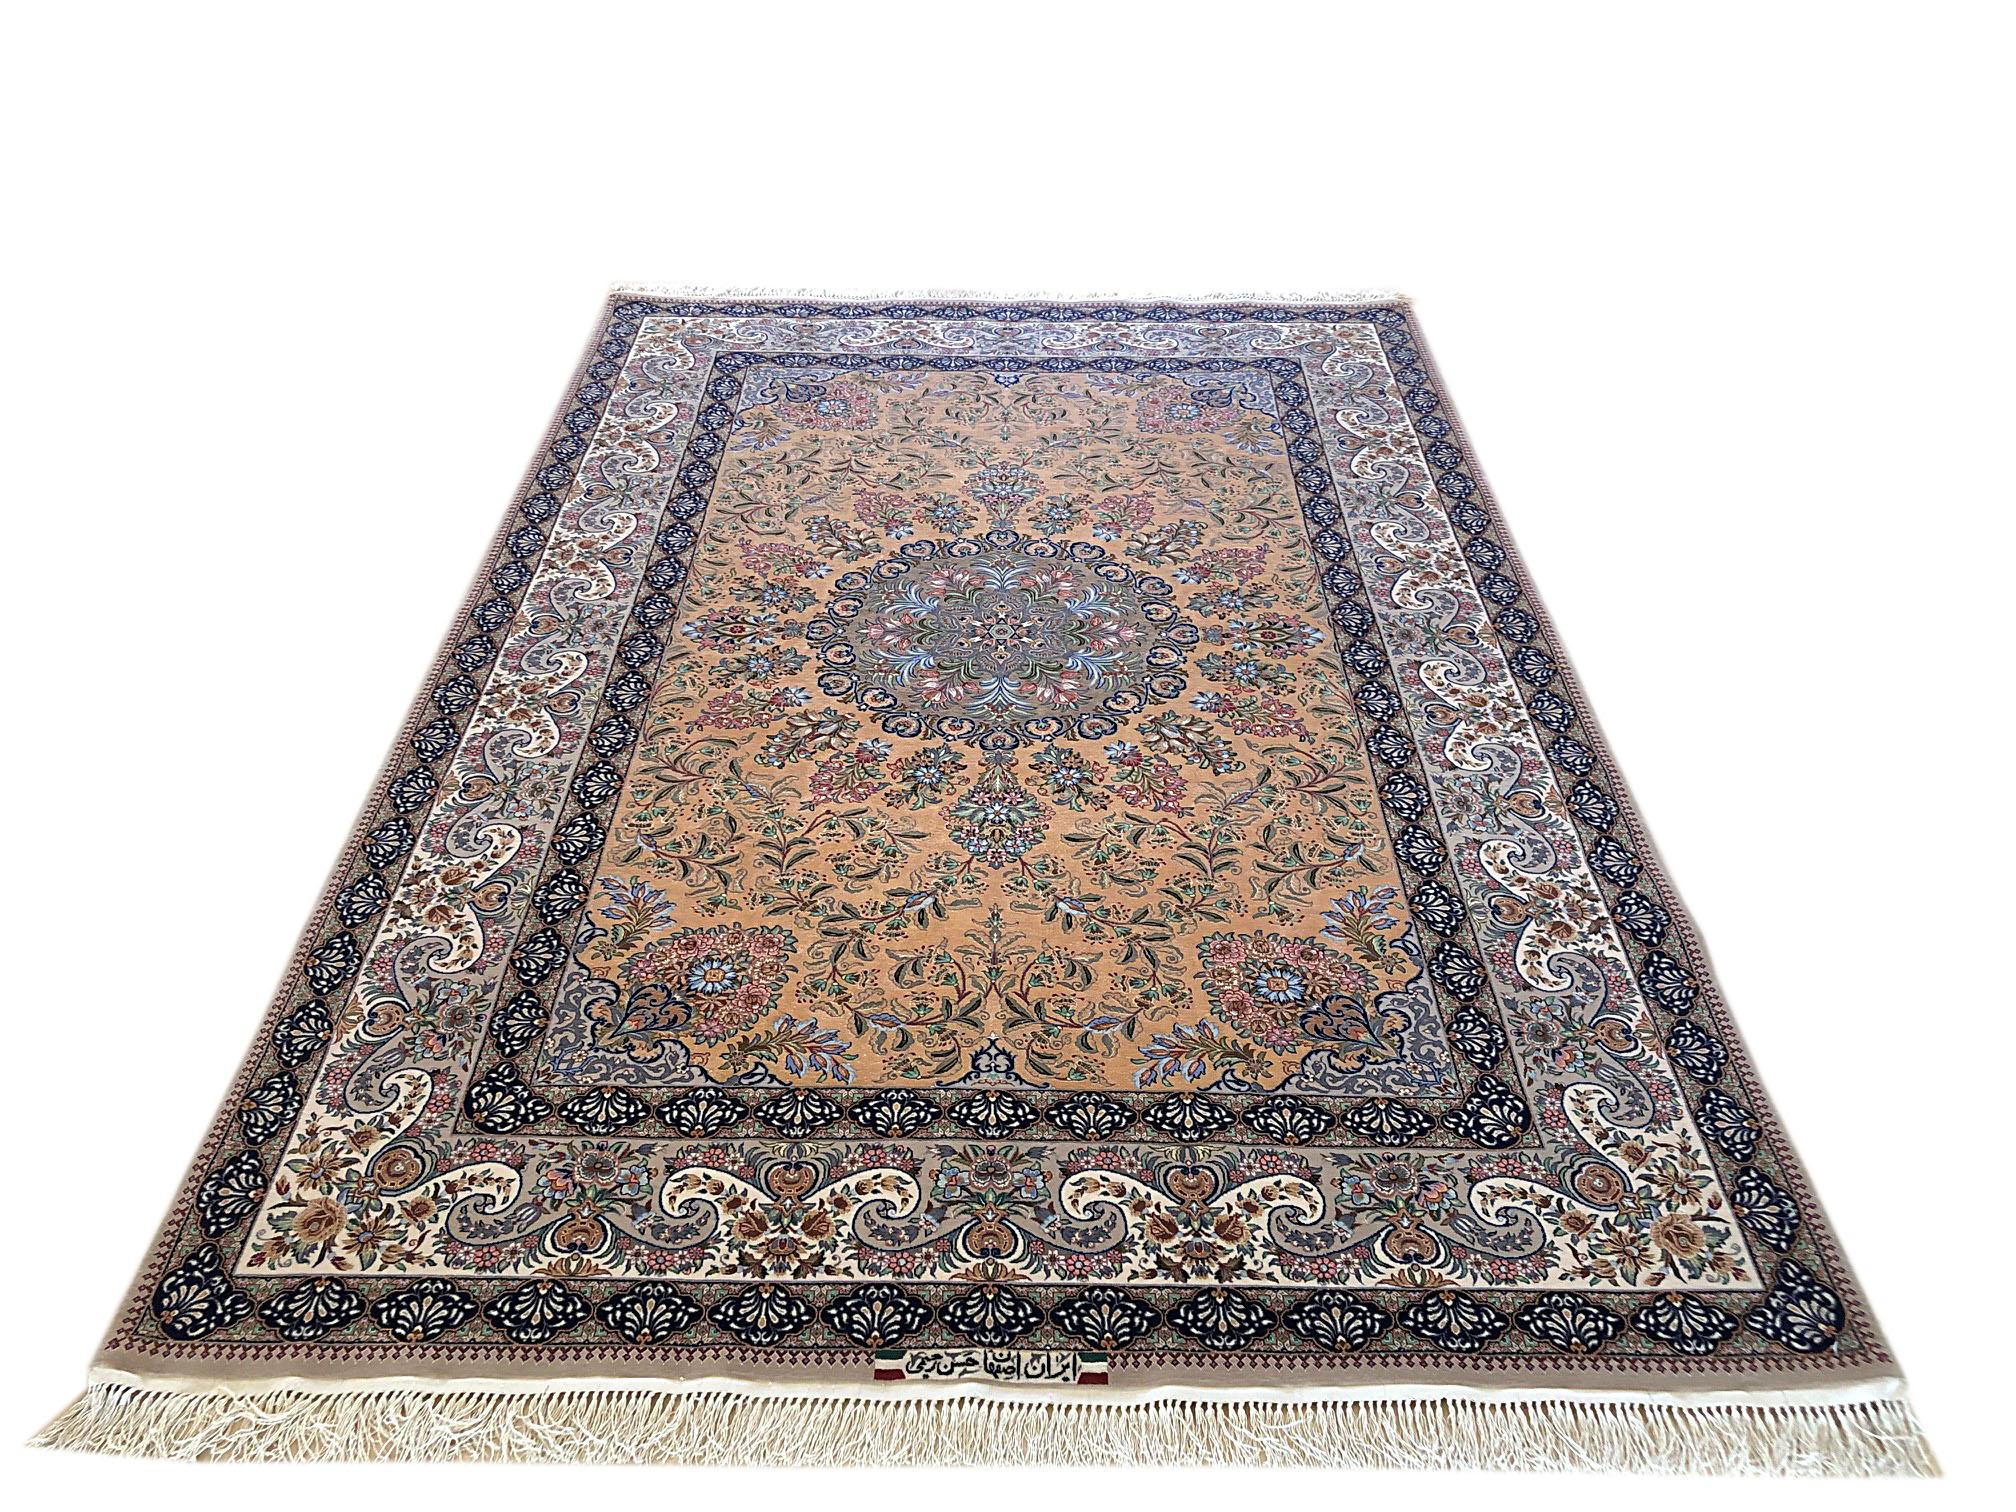 This authentic Persian Isfahan rug has wool and silk pile on silk foundation is a stunning example if the medallion floral rug. The beauty of this magnificent piece is most noticeable in its quality and color combination. This rug has signed by